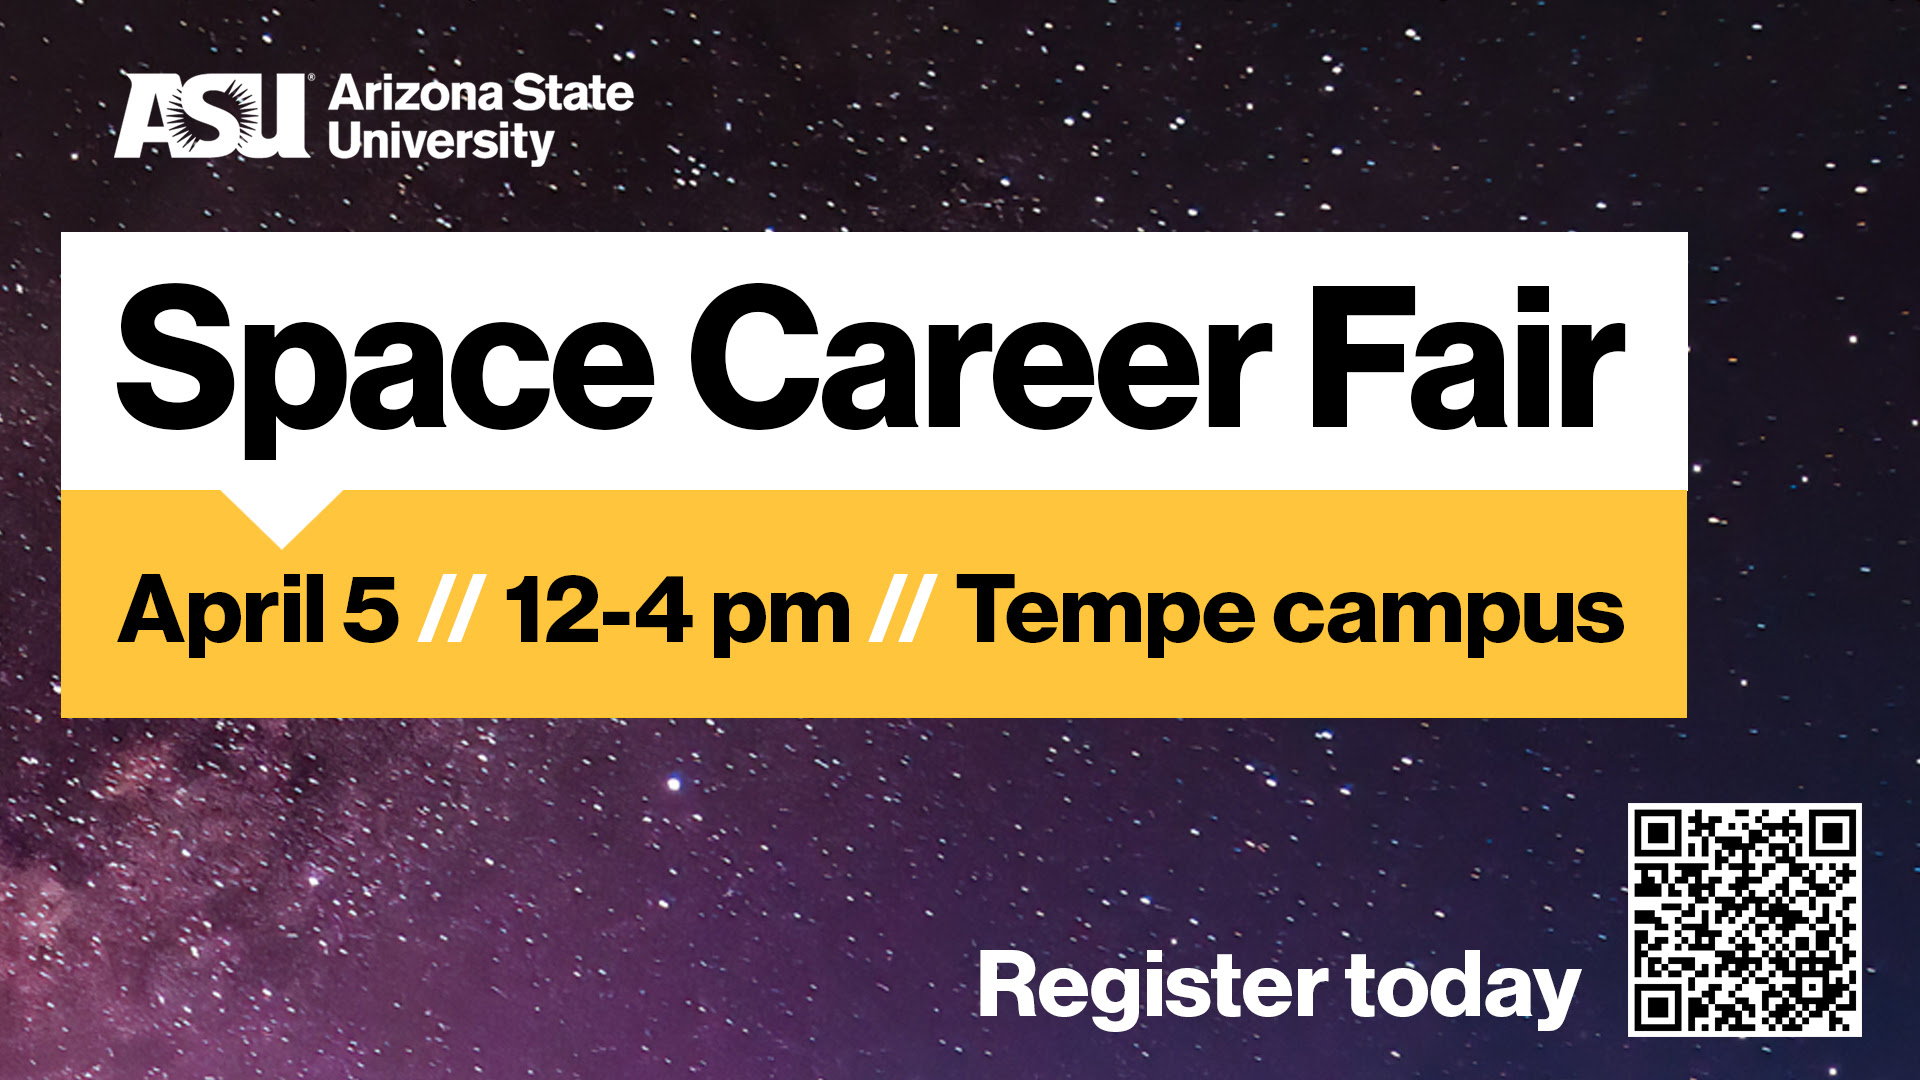 ASU Space Career Fair April 5, 12-4 PM on the Tempe Campus. Register Today!